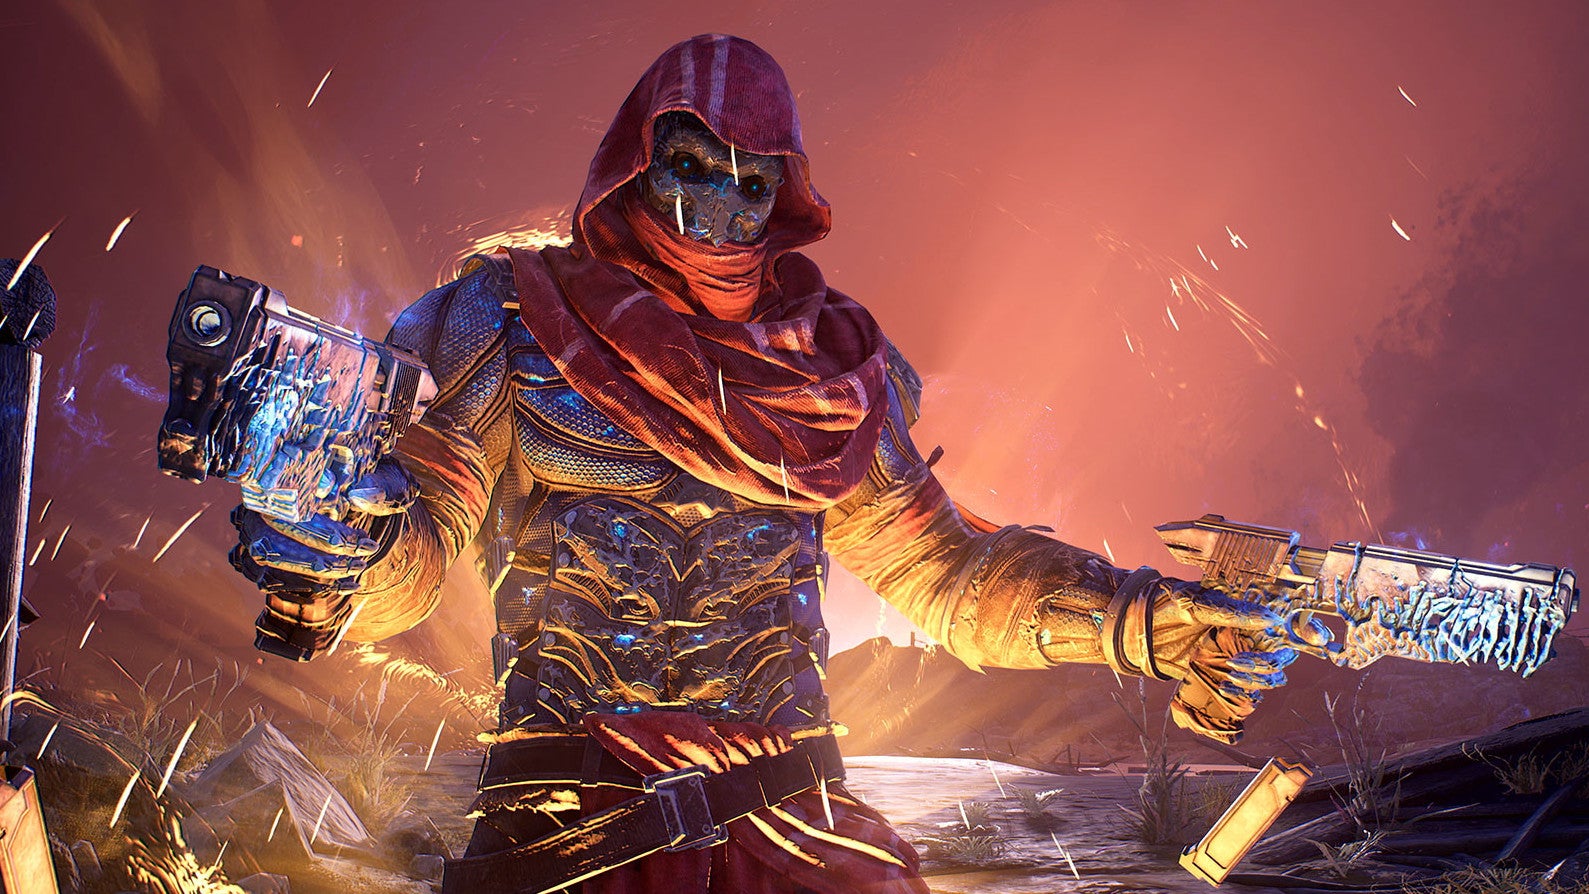 A hooded figure with two pistols in an Outriders screenshot.